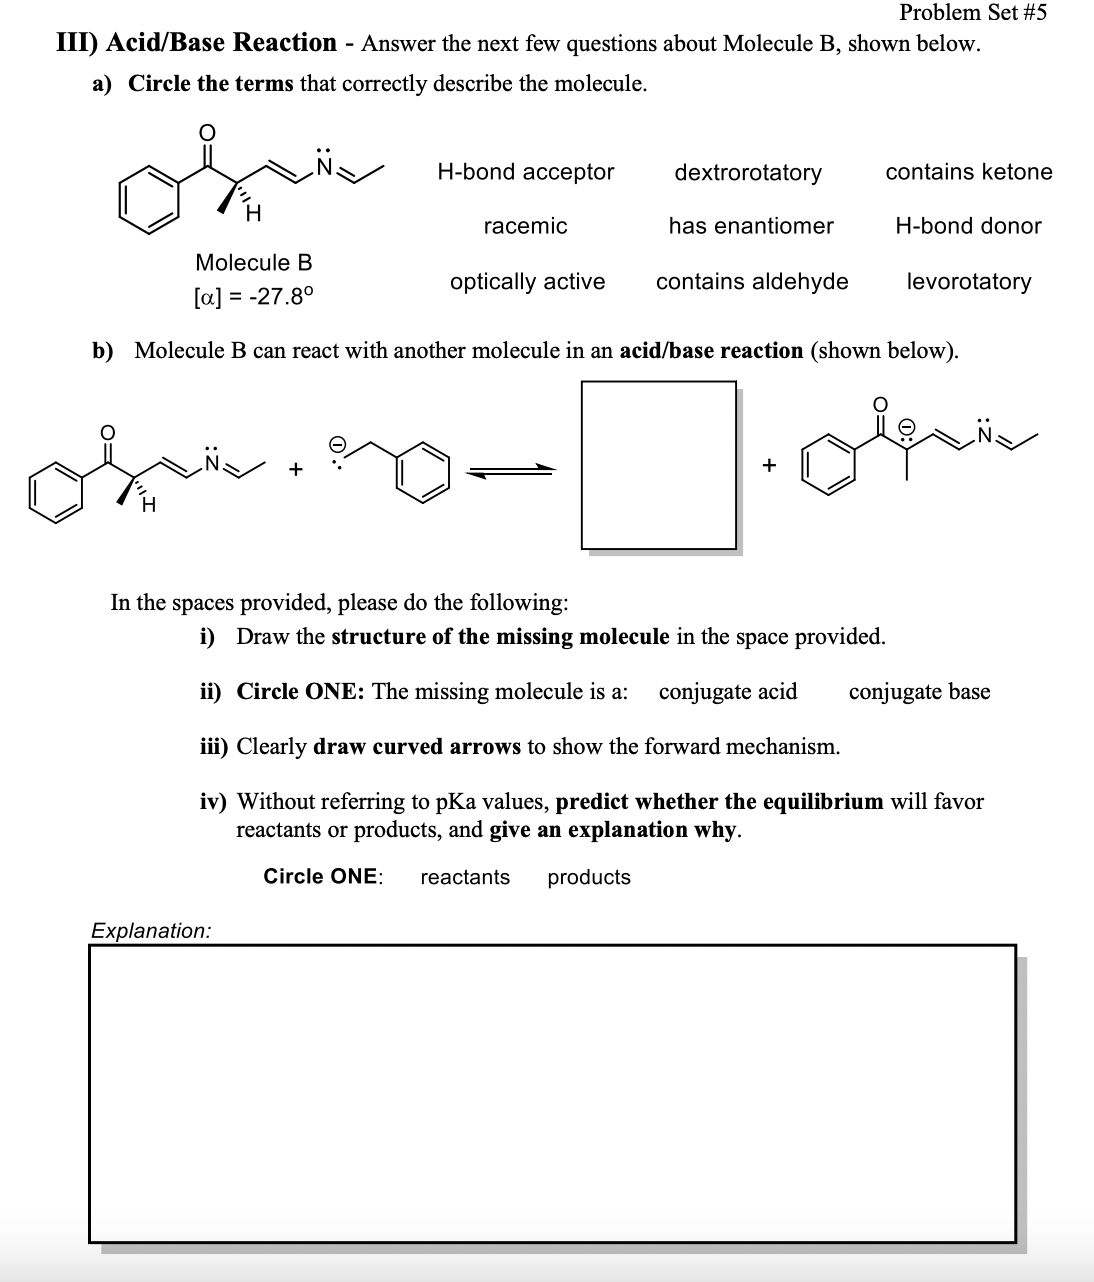 Problem Set #5
III) Acid/Base Reaction - Answer the next few questions about Molecule B, shown below.
a) Circle the terms that correctly describe the molecule.
H-bond acceptor
dextrorotatory
contains ketone
racemic
has enantiomer
H-bond donor
Molecule B
optically active
contains aldehyde
levorotatory
[a] = -27.8°
b) Molecule B can react with another molecule in an acid/base reaction (shown below).
+
H
In the spaces provided, please do the following:
i) Draw the structure of the missing molecule in the space provided.
ii) Circle ONE: The missing molecule is a:
conjugate acid
conjugate base
iii) Clearly draw curved arrows to show the forward mechanism.
iv) Without referring to pKa values, predict whether the equilibrium will favor
reactants or products, and give an explanation why.
Circle ONE:
reactants
products
Explanation:
